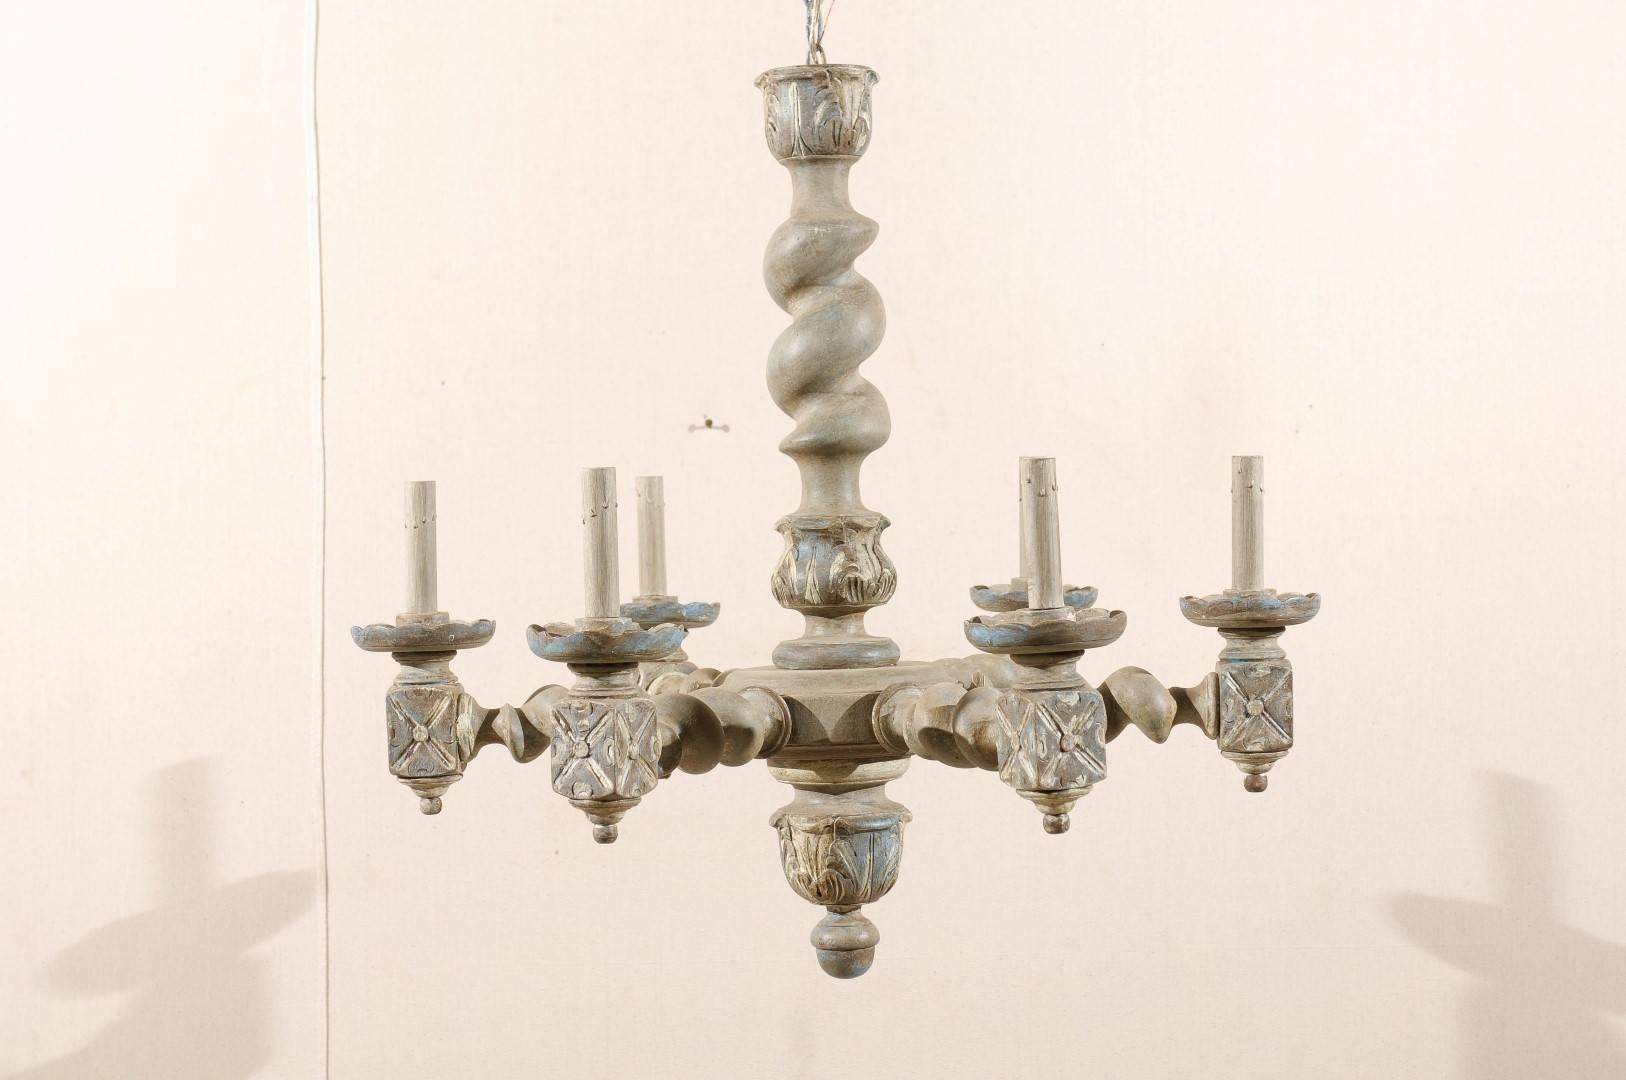 A French six-light barley twist wooden chandelier. This French vintage painted wood chandelier features a central barley twist column with acanthus leaf motifs. Six barley twist arms are connected to the central ring. The wooden bobèches are